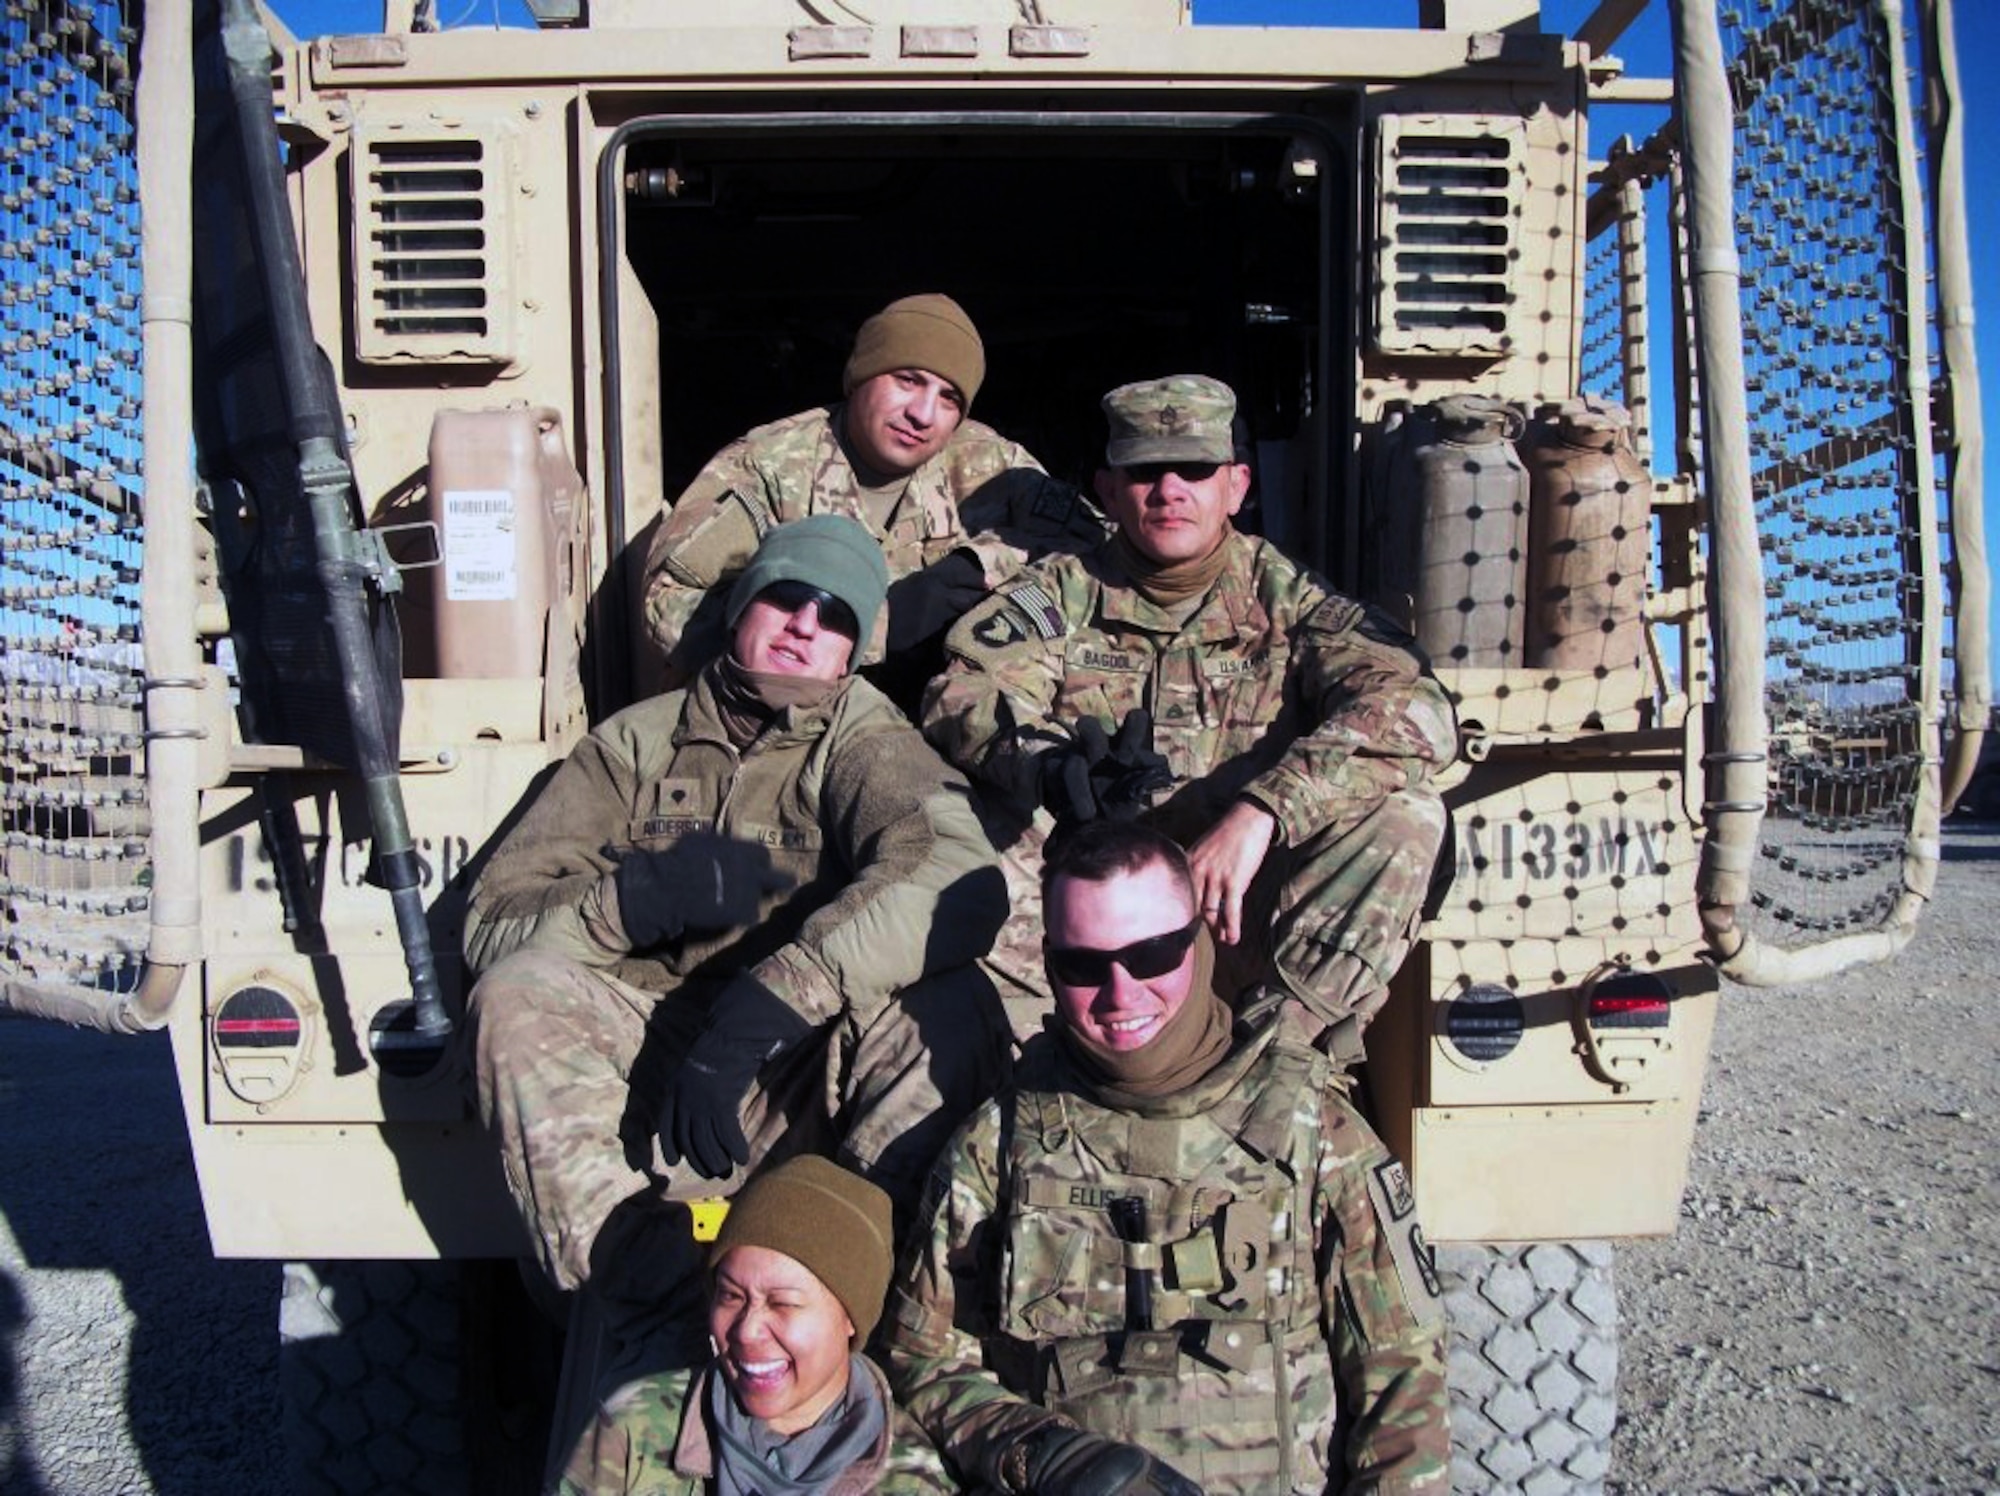 Air Force Staff Sgt. Maria Szymanski, a 366th Surgical Operations Squadron medical technician (bottom), poses with her five-person convoy team before a May 29-30, 2013 convoy from Bagram Airfield, Afghanistan, to forward operating bases and combat outposts in Wardak Province. The next day, during day two of the mission, the vehicle Szymanski was supposed to ride in, struck an improvised explosive device, killing Army Staff Sgt. Joe Nunez, and wounding Air Force Senior Airman Taylor Savage, deployed from Charleston Air Force Base, S.C., and several others. (Courtesy photo)